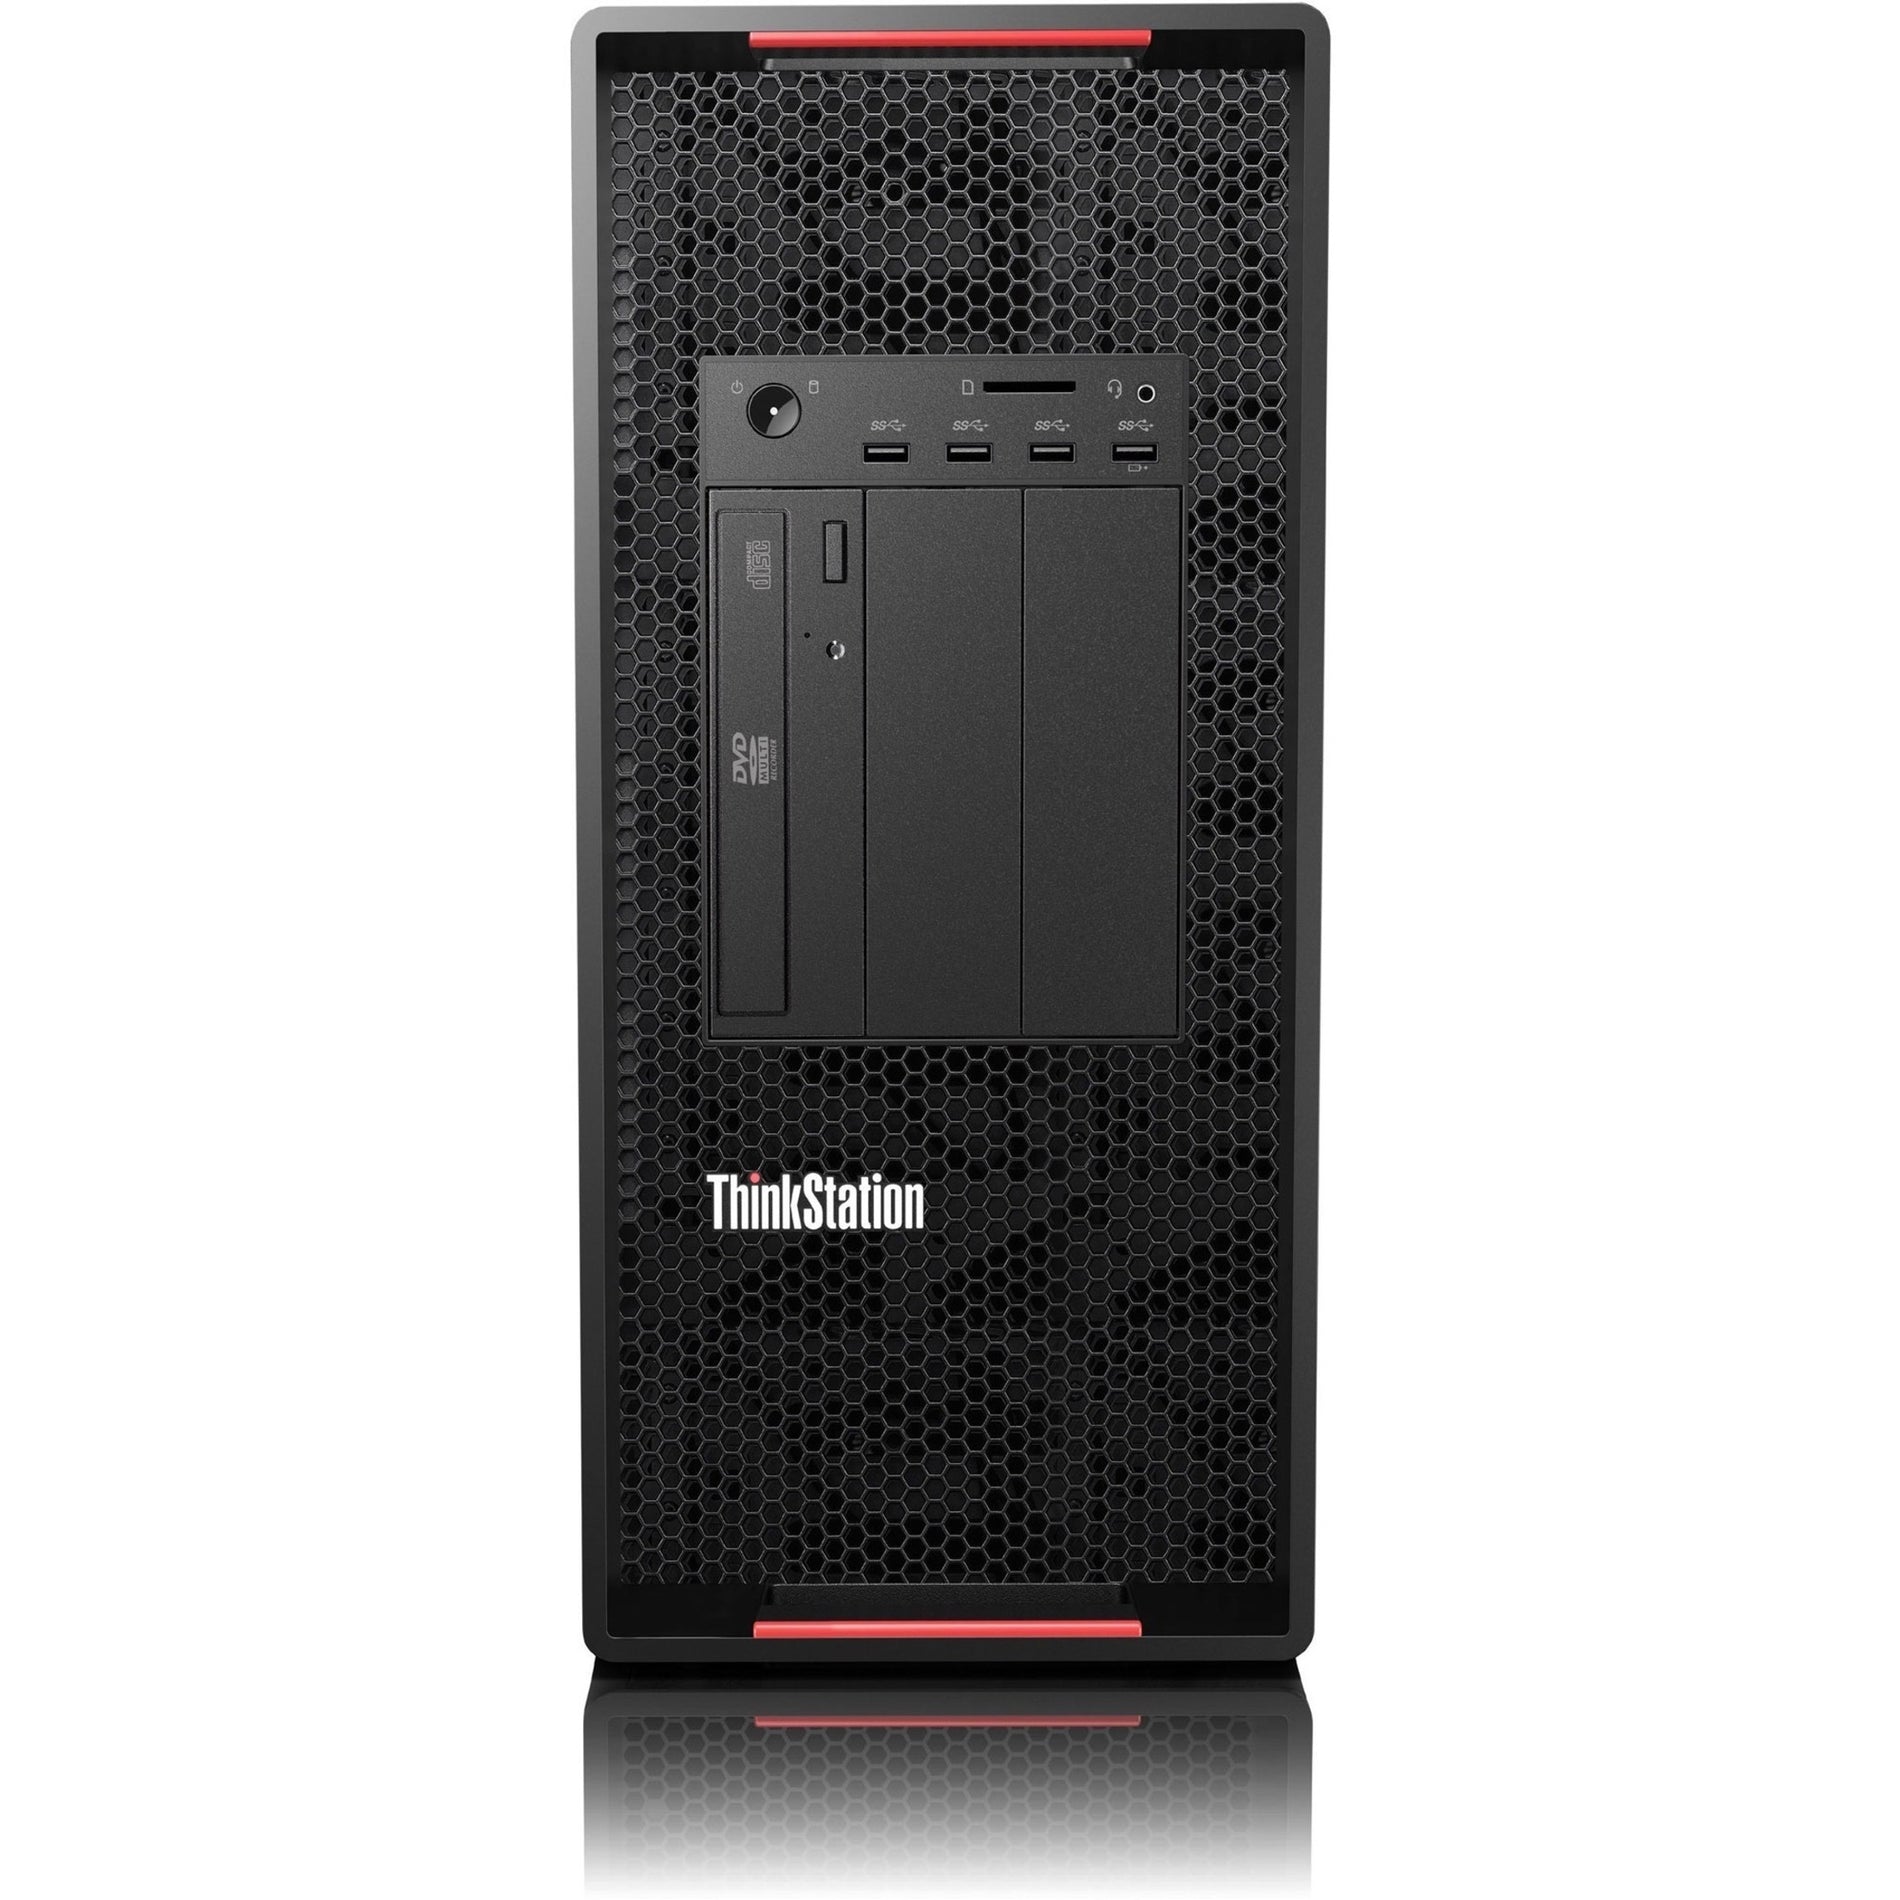 Lenovo ThinkStation P920 30BC0065US Workstation - 1 x Intel Xeon Gold Hexadeca-core (16 Core) 6226R 2.90 GHz - 64 GB DDR4 SDRAM RAM - 1 TB SSD - Tower (30BC0065US) Front image